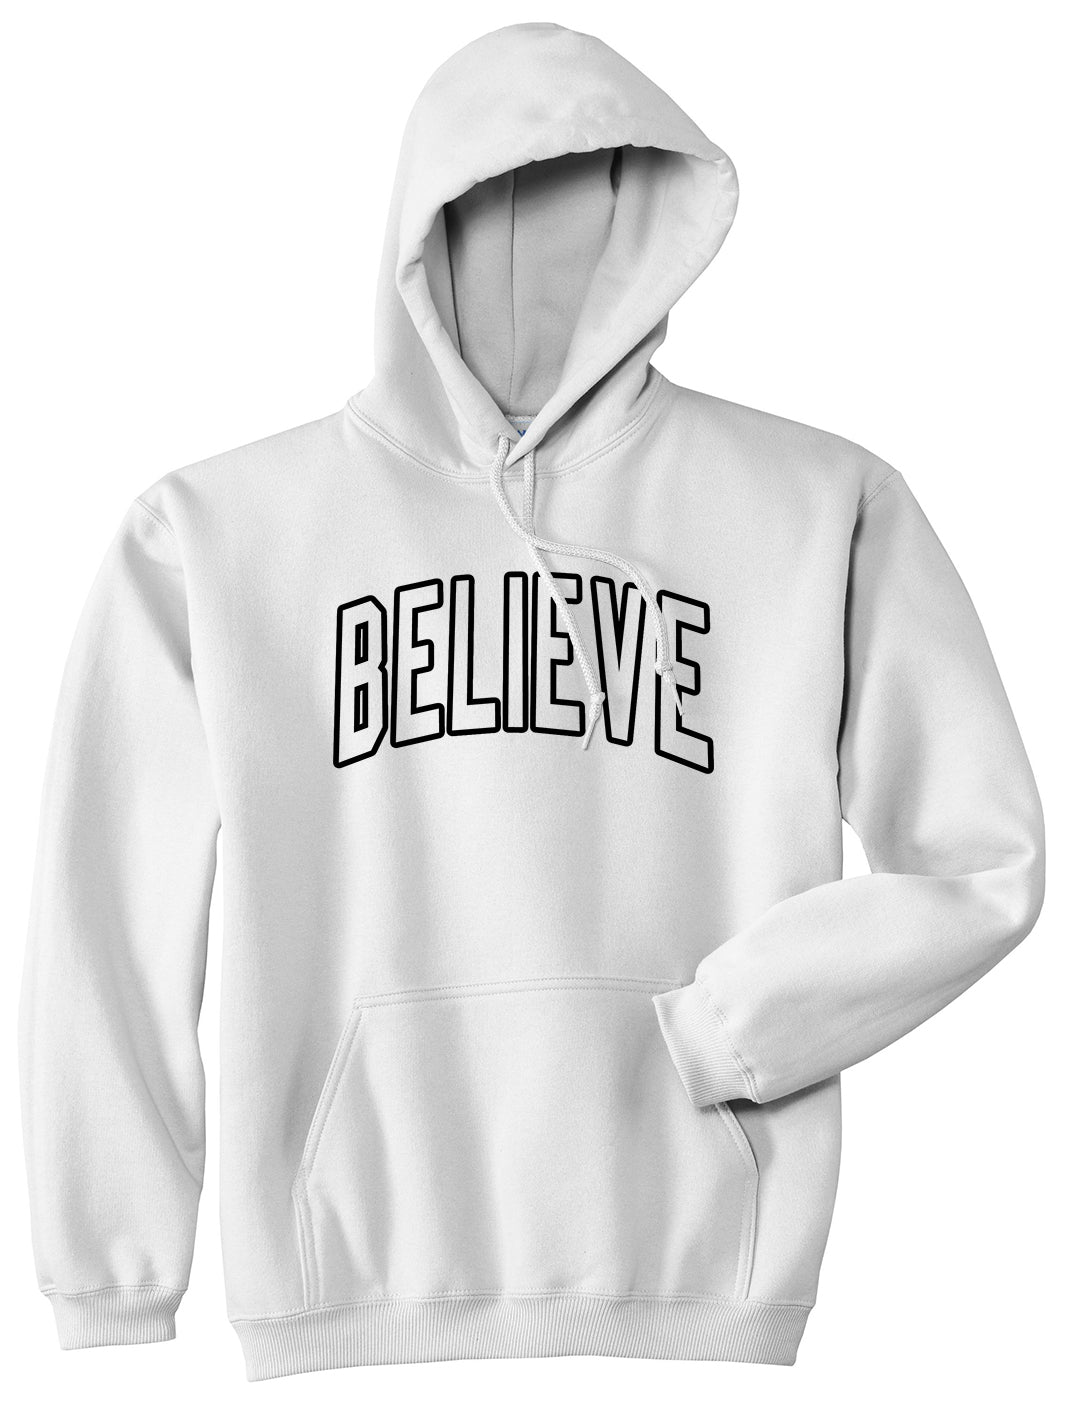 Believe Outline Mens Pullover Hoodie White by Kings Of NY